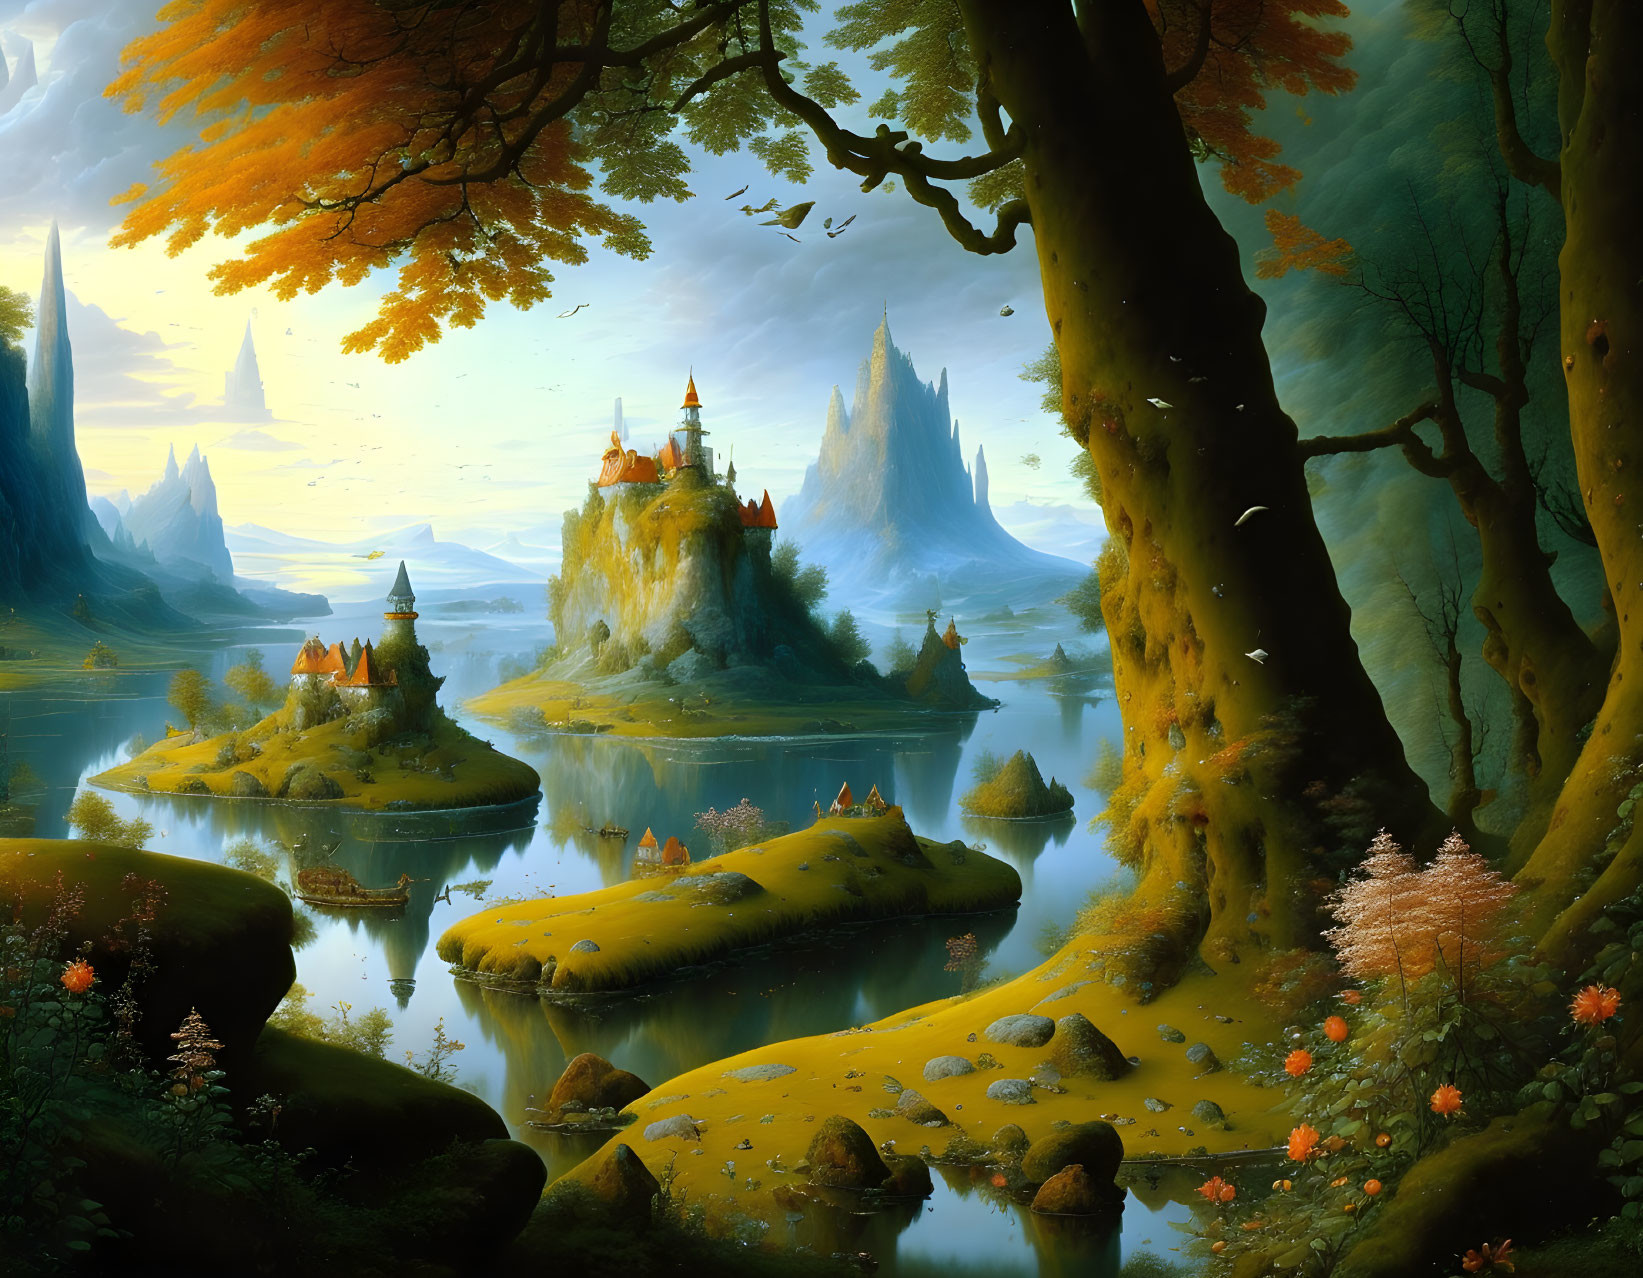 Fantasy landscape with castles on lush islands, giant trees, autumn foliage, and mountains